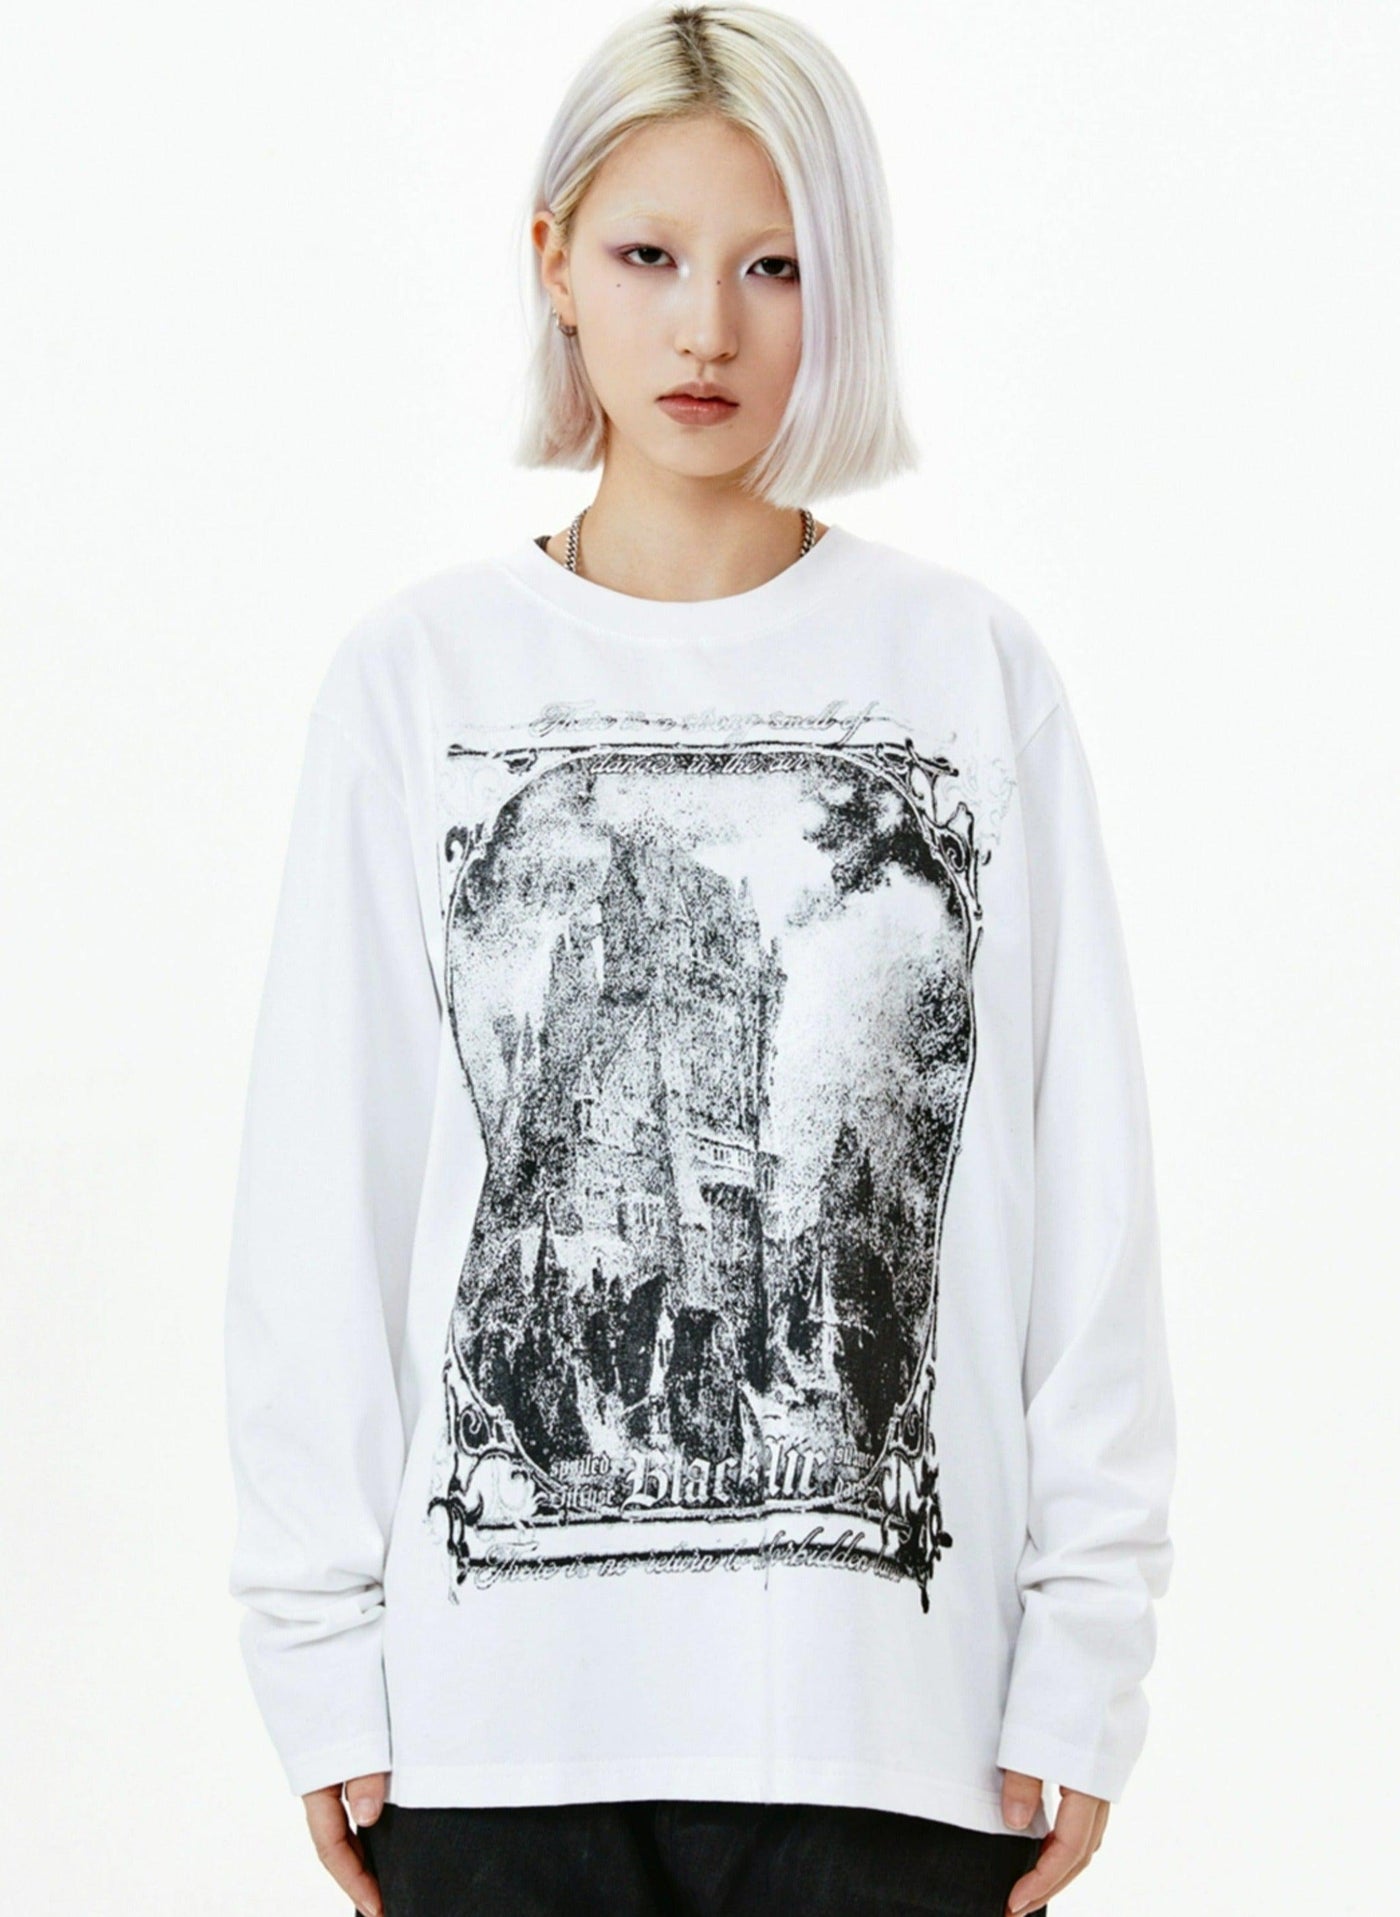 Vintage Graphic Long Sleeve T-Shirt Korean Street Fashion T-Shirt By Made Extreme Shop Online at OH Vault